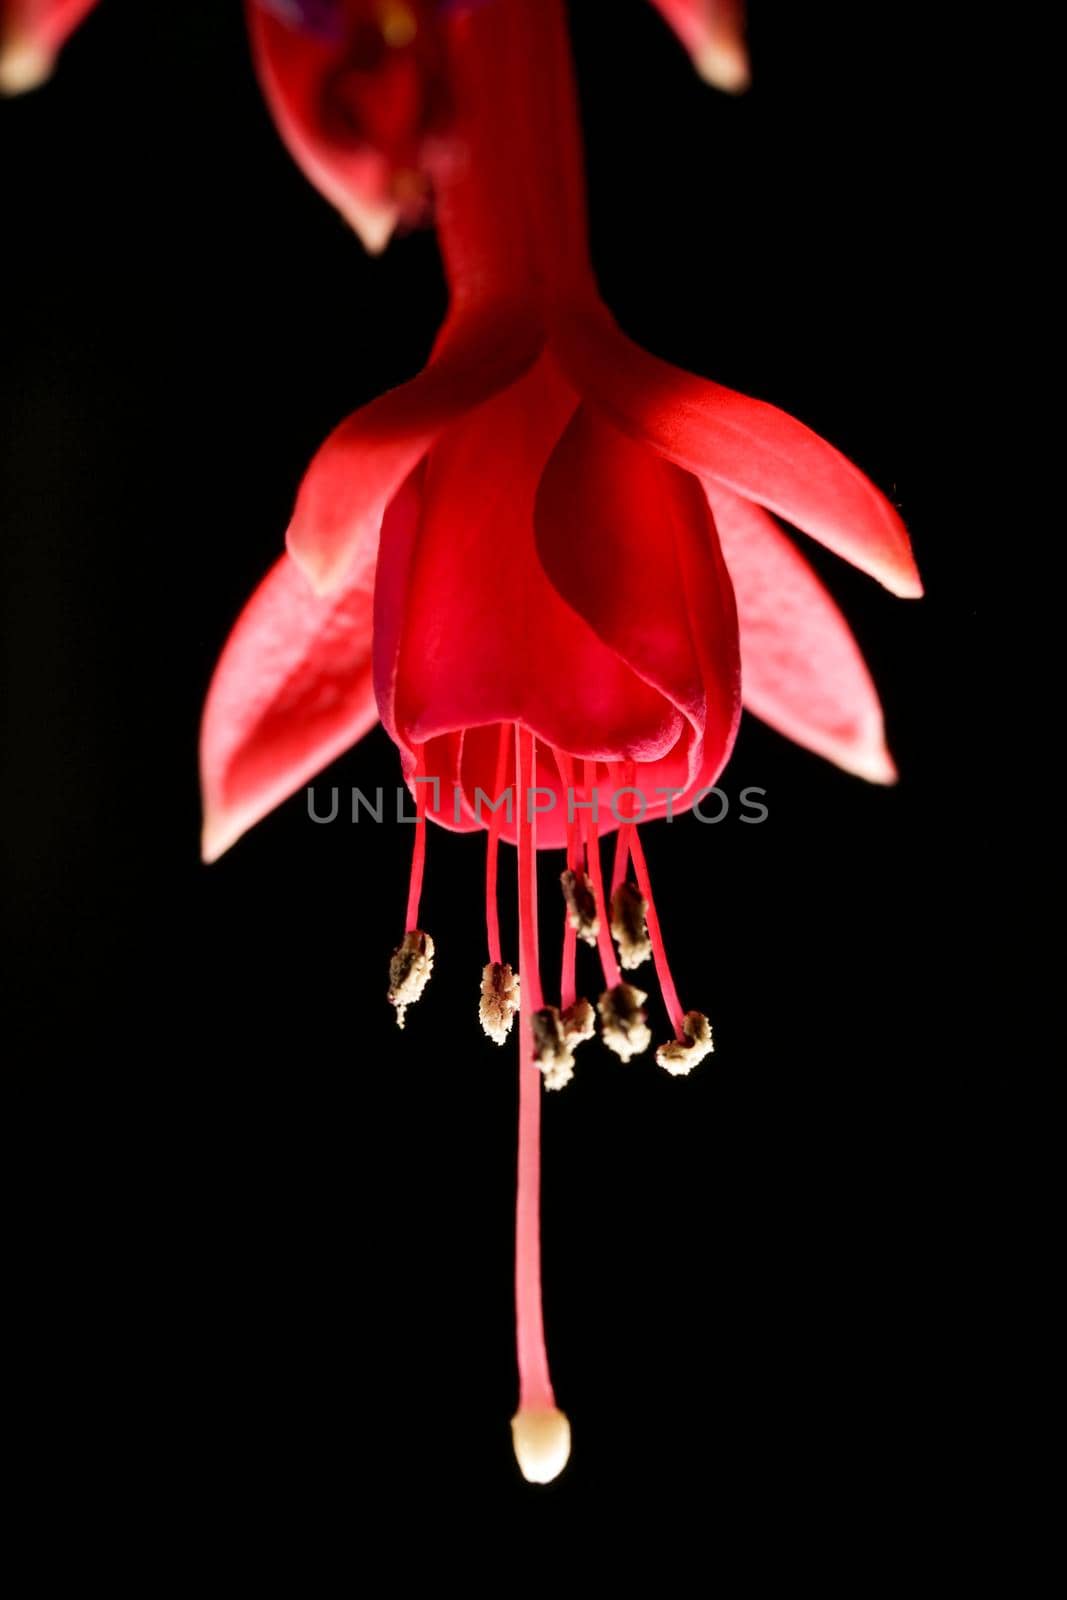 A close up view of fuchsia flowers.